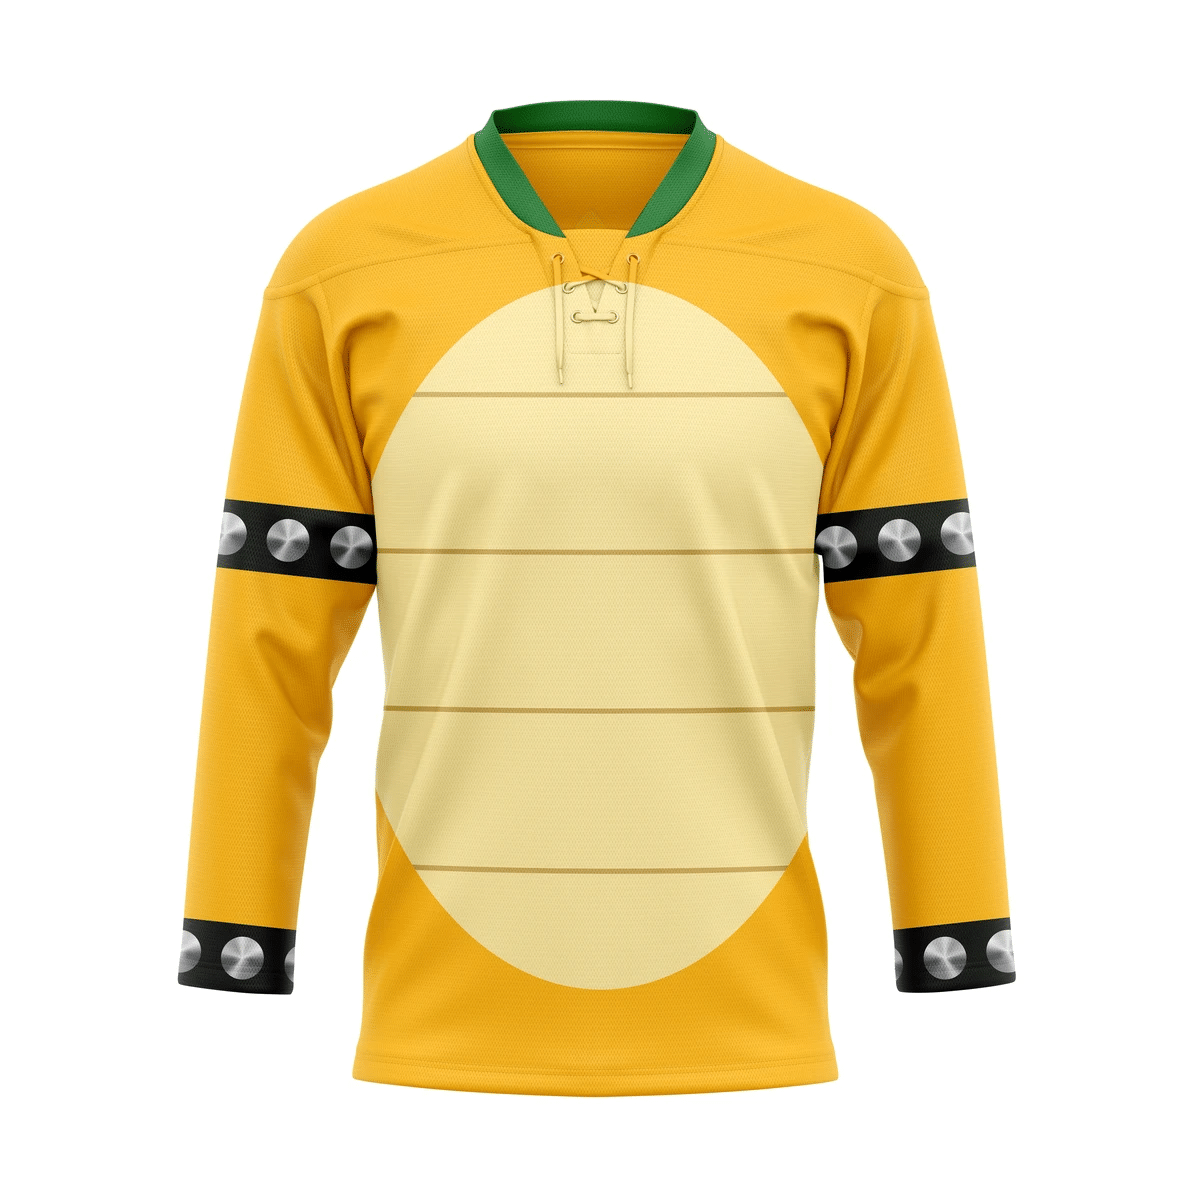 Top cool Hockey jersey for fan You can buy online. 70